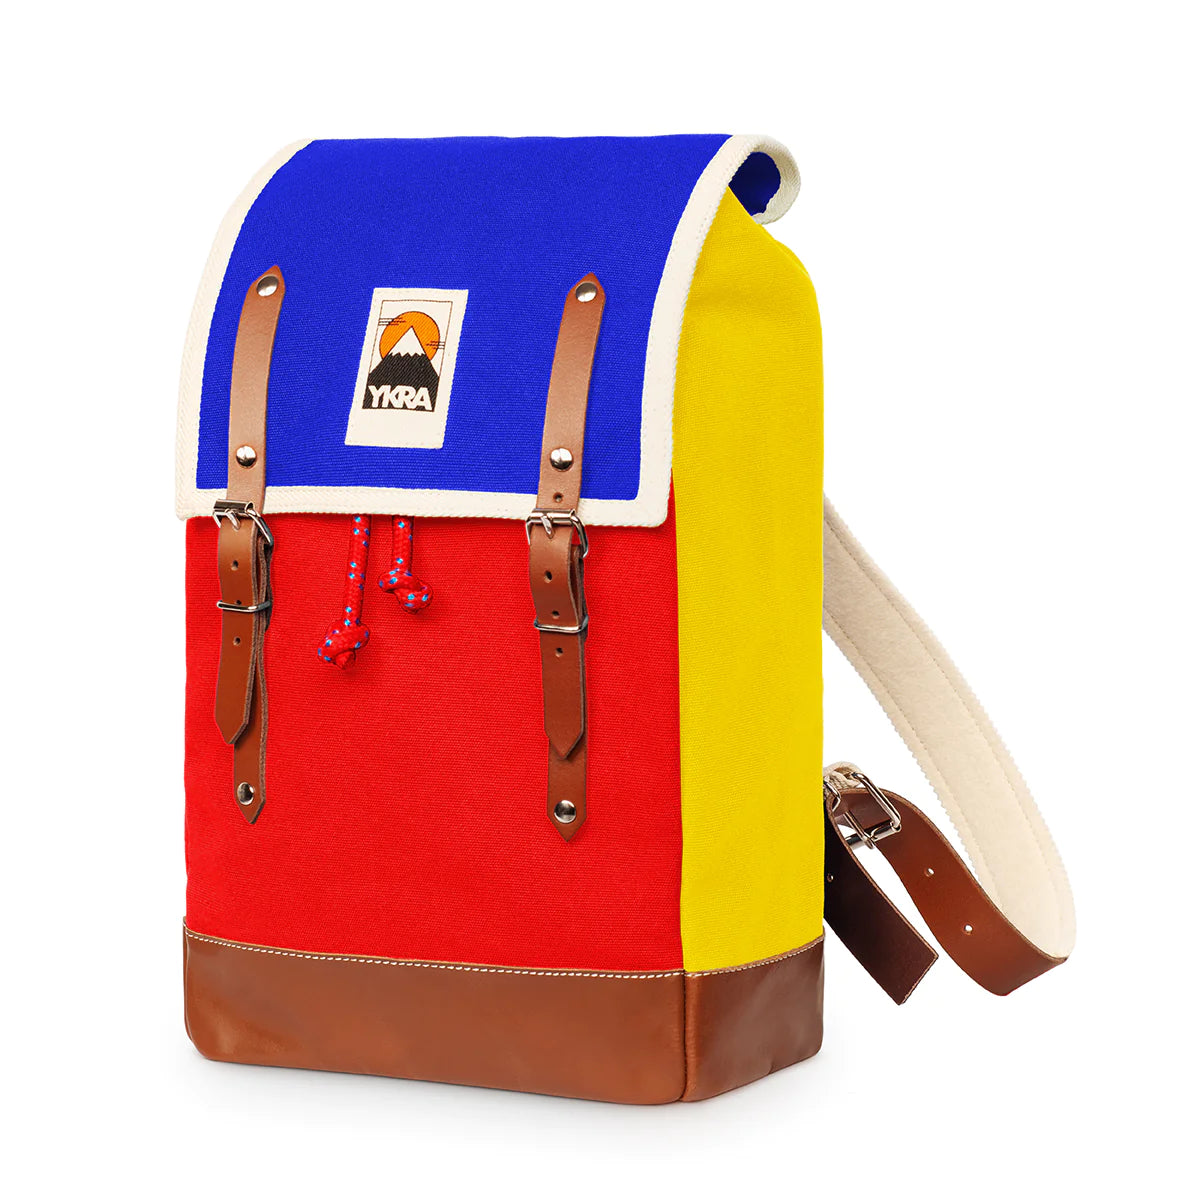 Matra Mini Backpack in Tricolor by YKRA